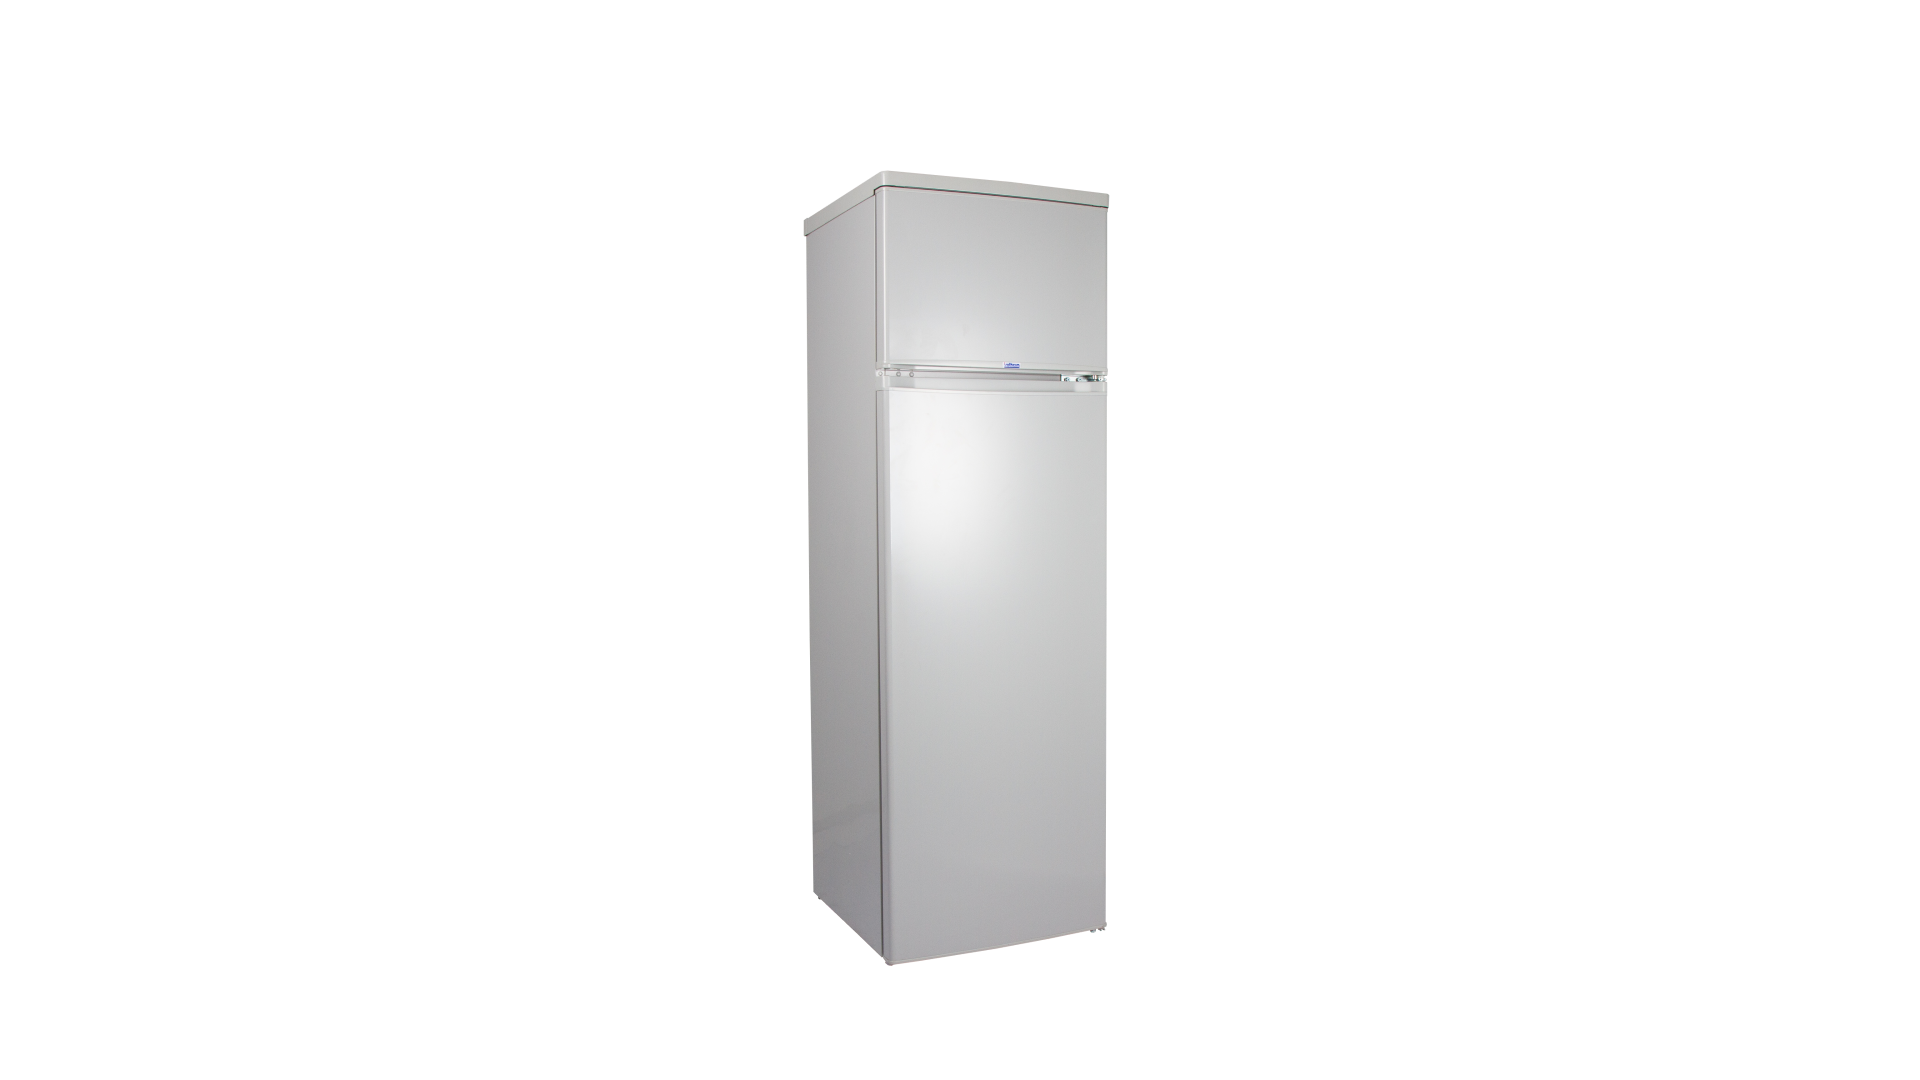 Product picture of Cruise Silver 280 fridge with closed door